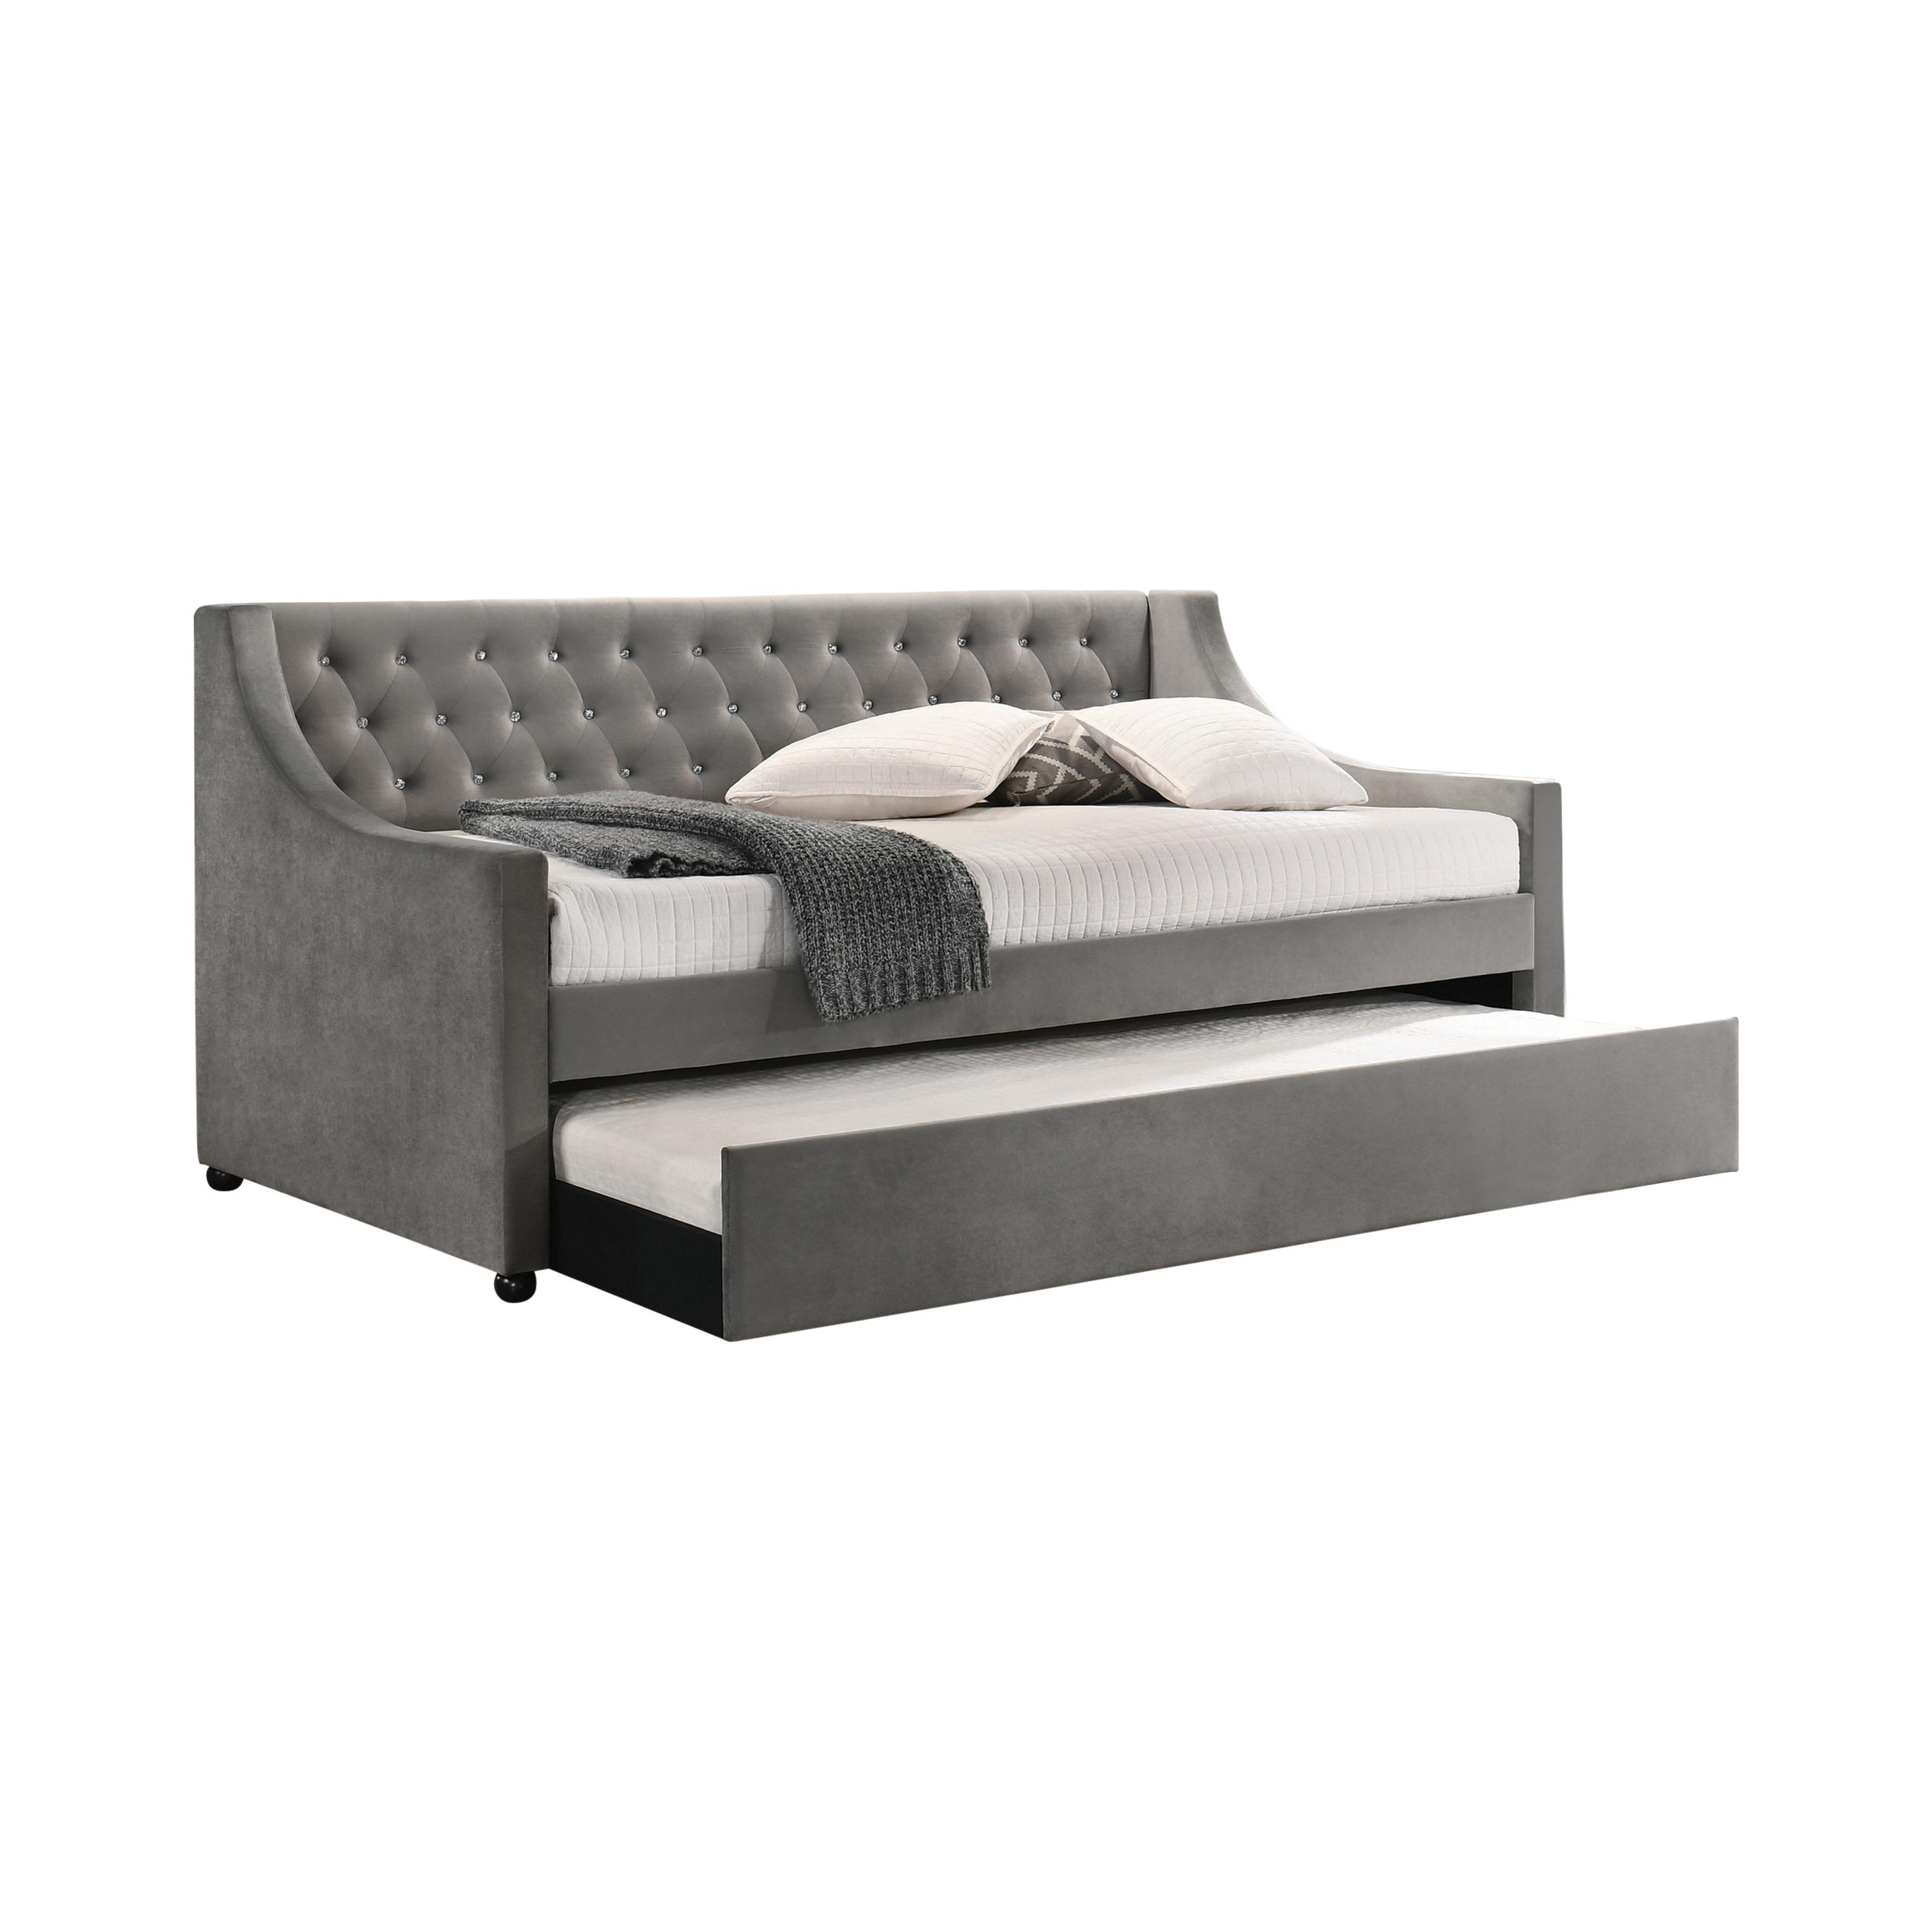 Contemporary Daybed w/Trundle 305883 Chatsboro 305883 in Gray Velvet